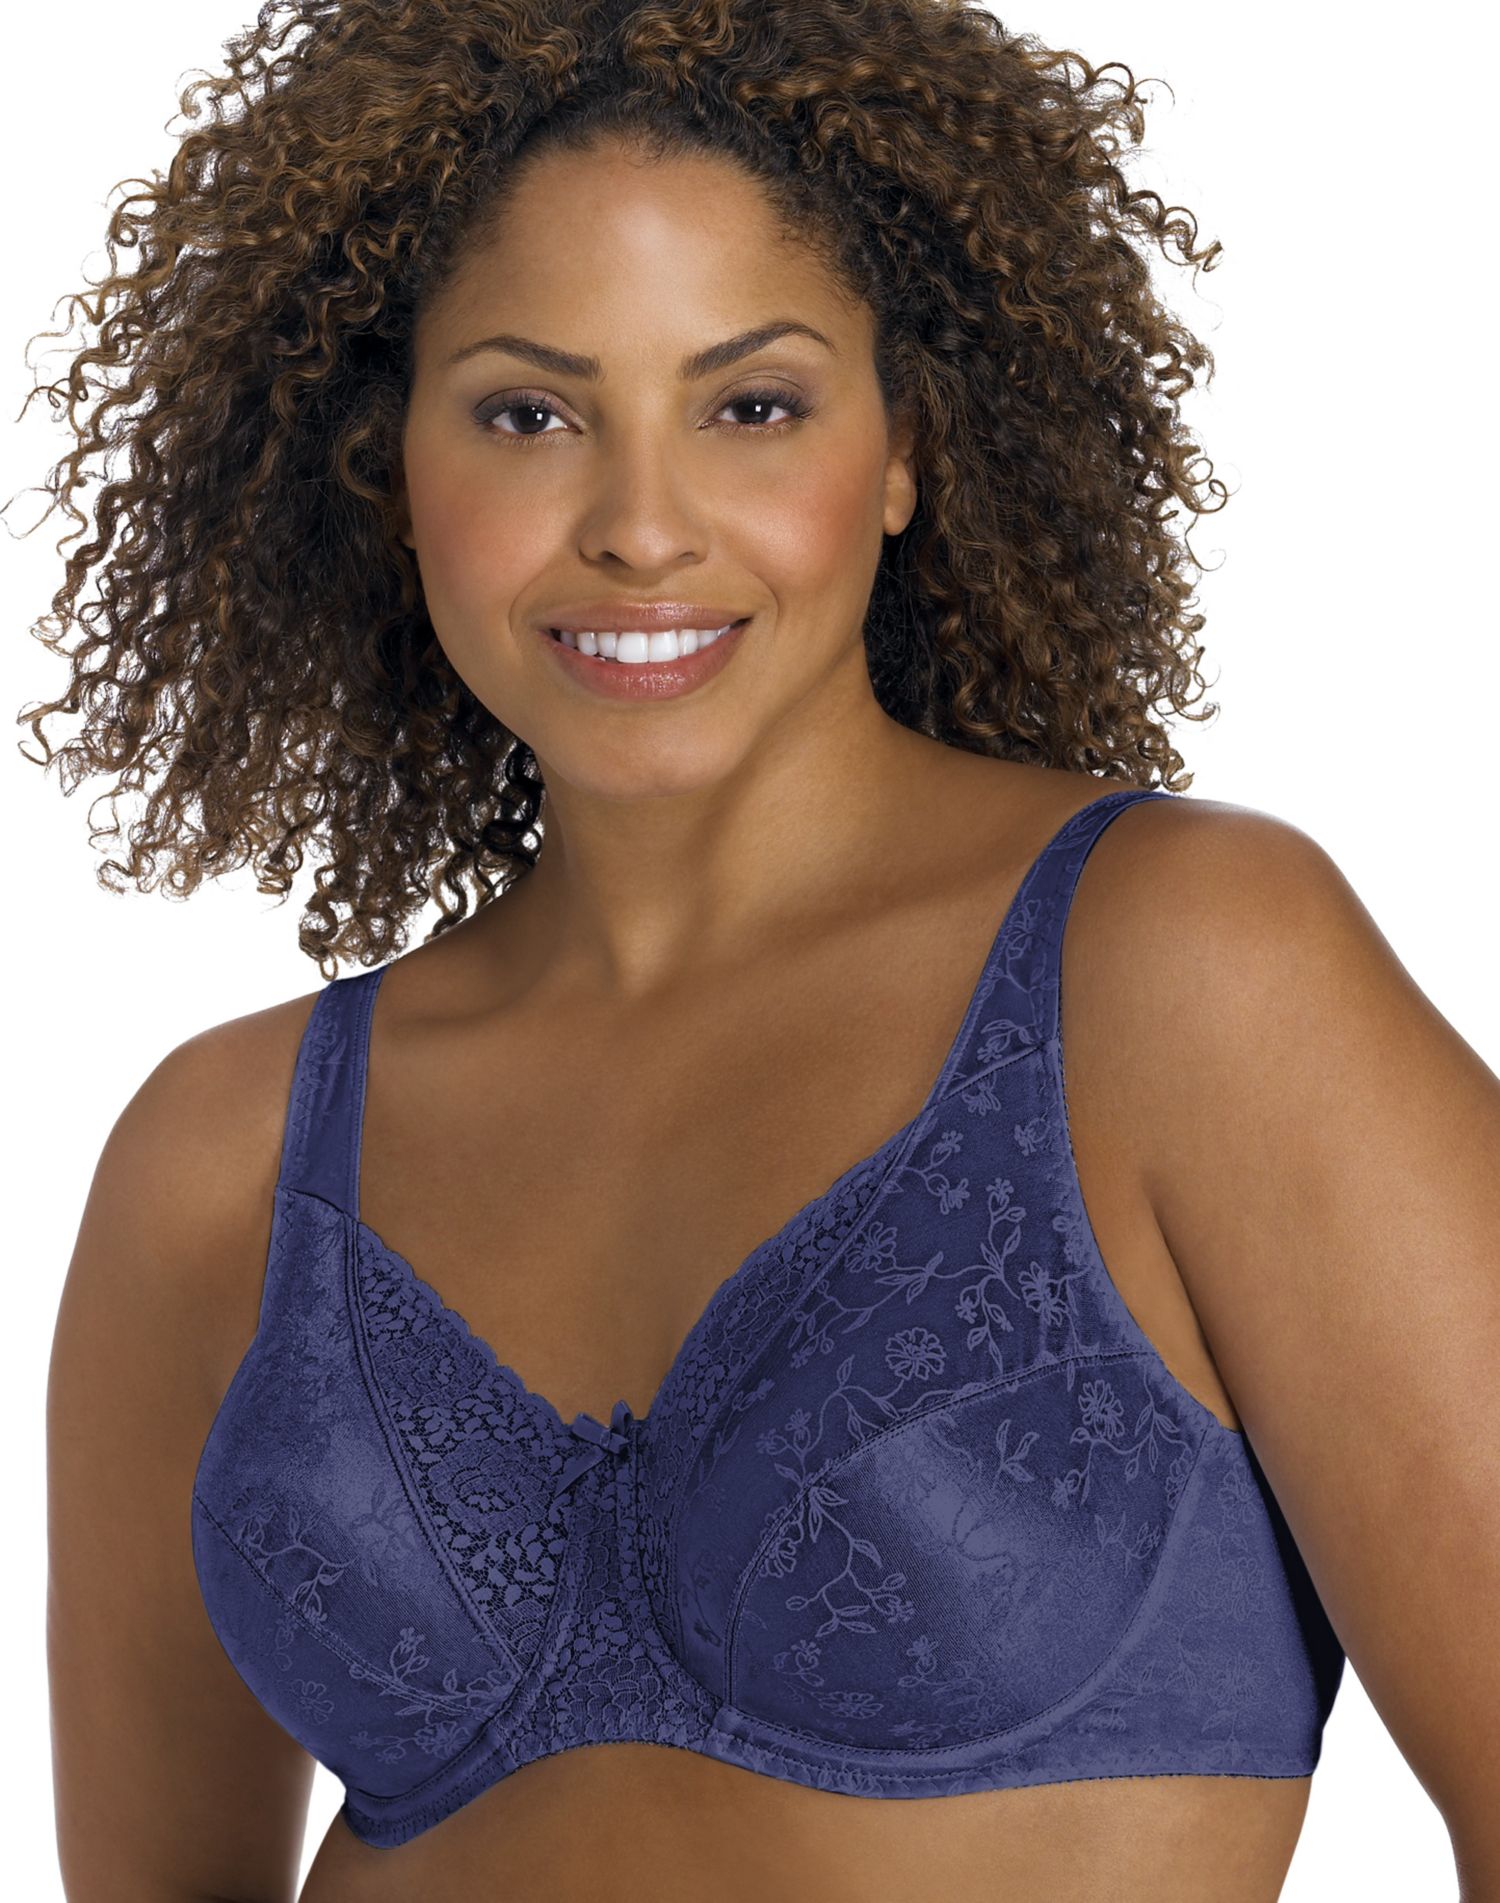 Playtex® Secrets® Lifts & Supports Full Figure Unlined Underwire Bra 4422